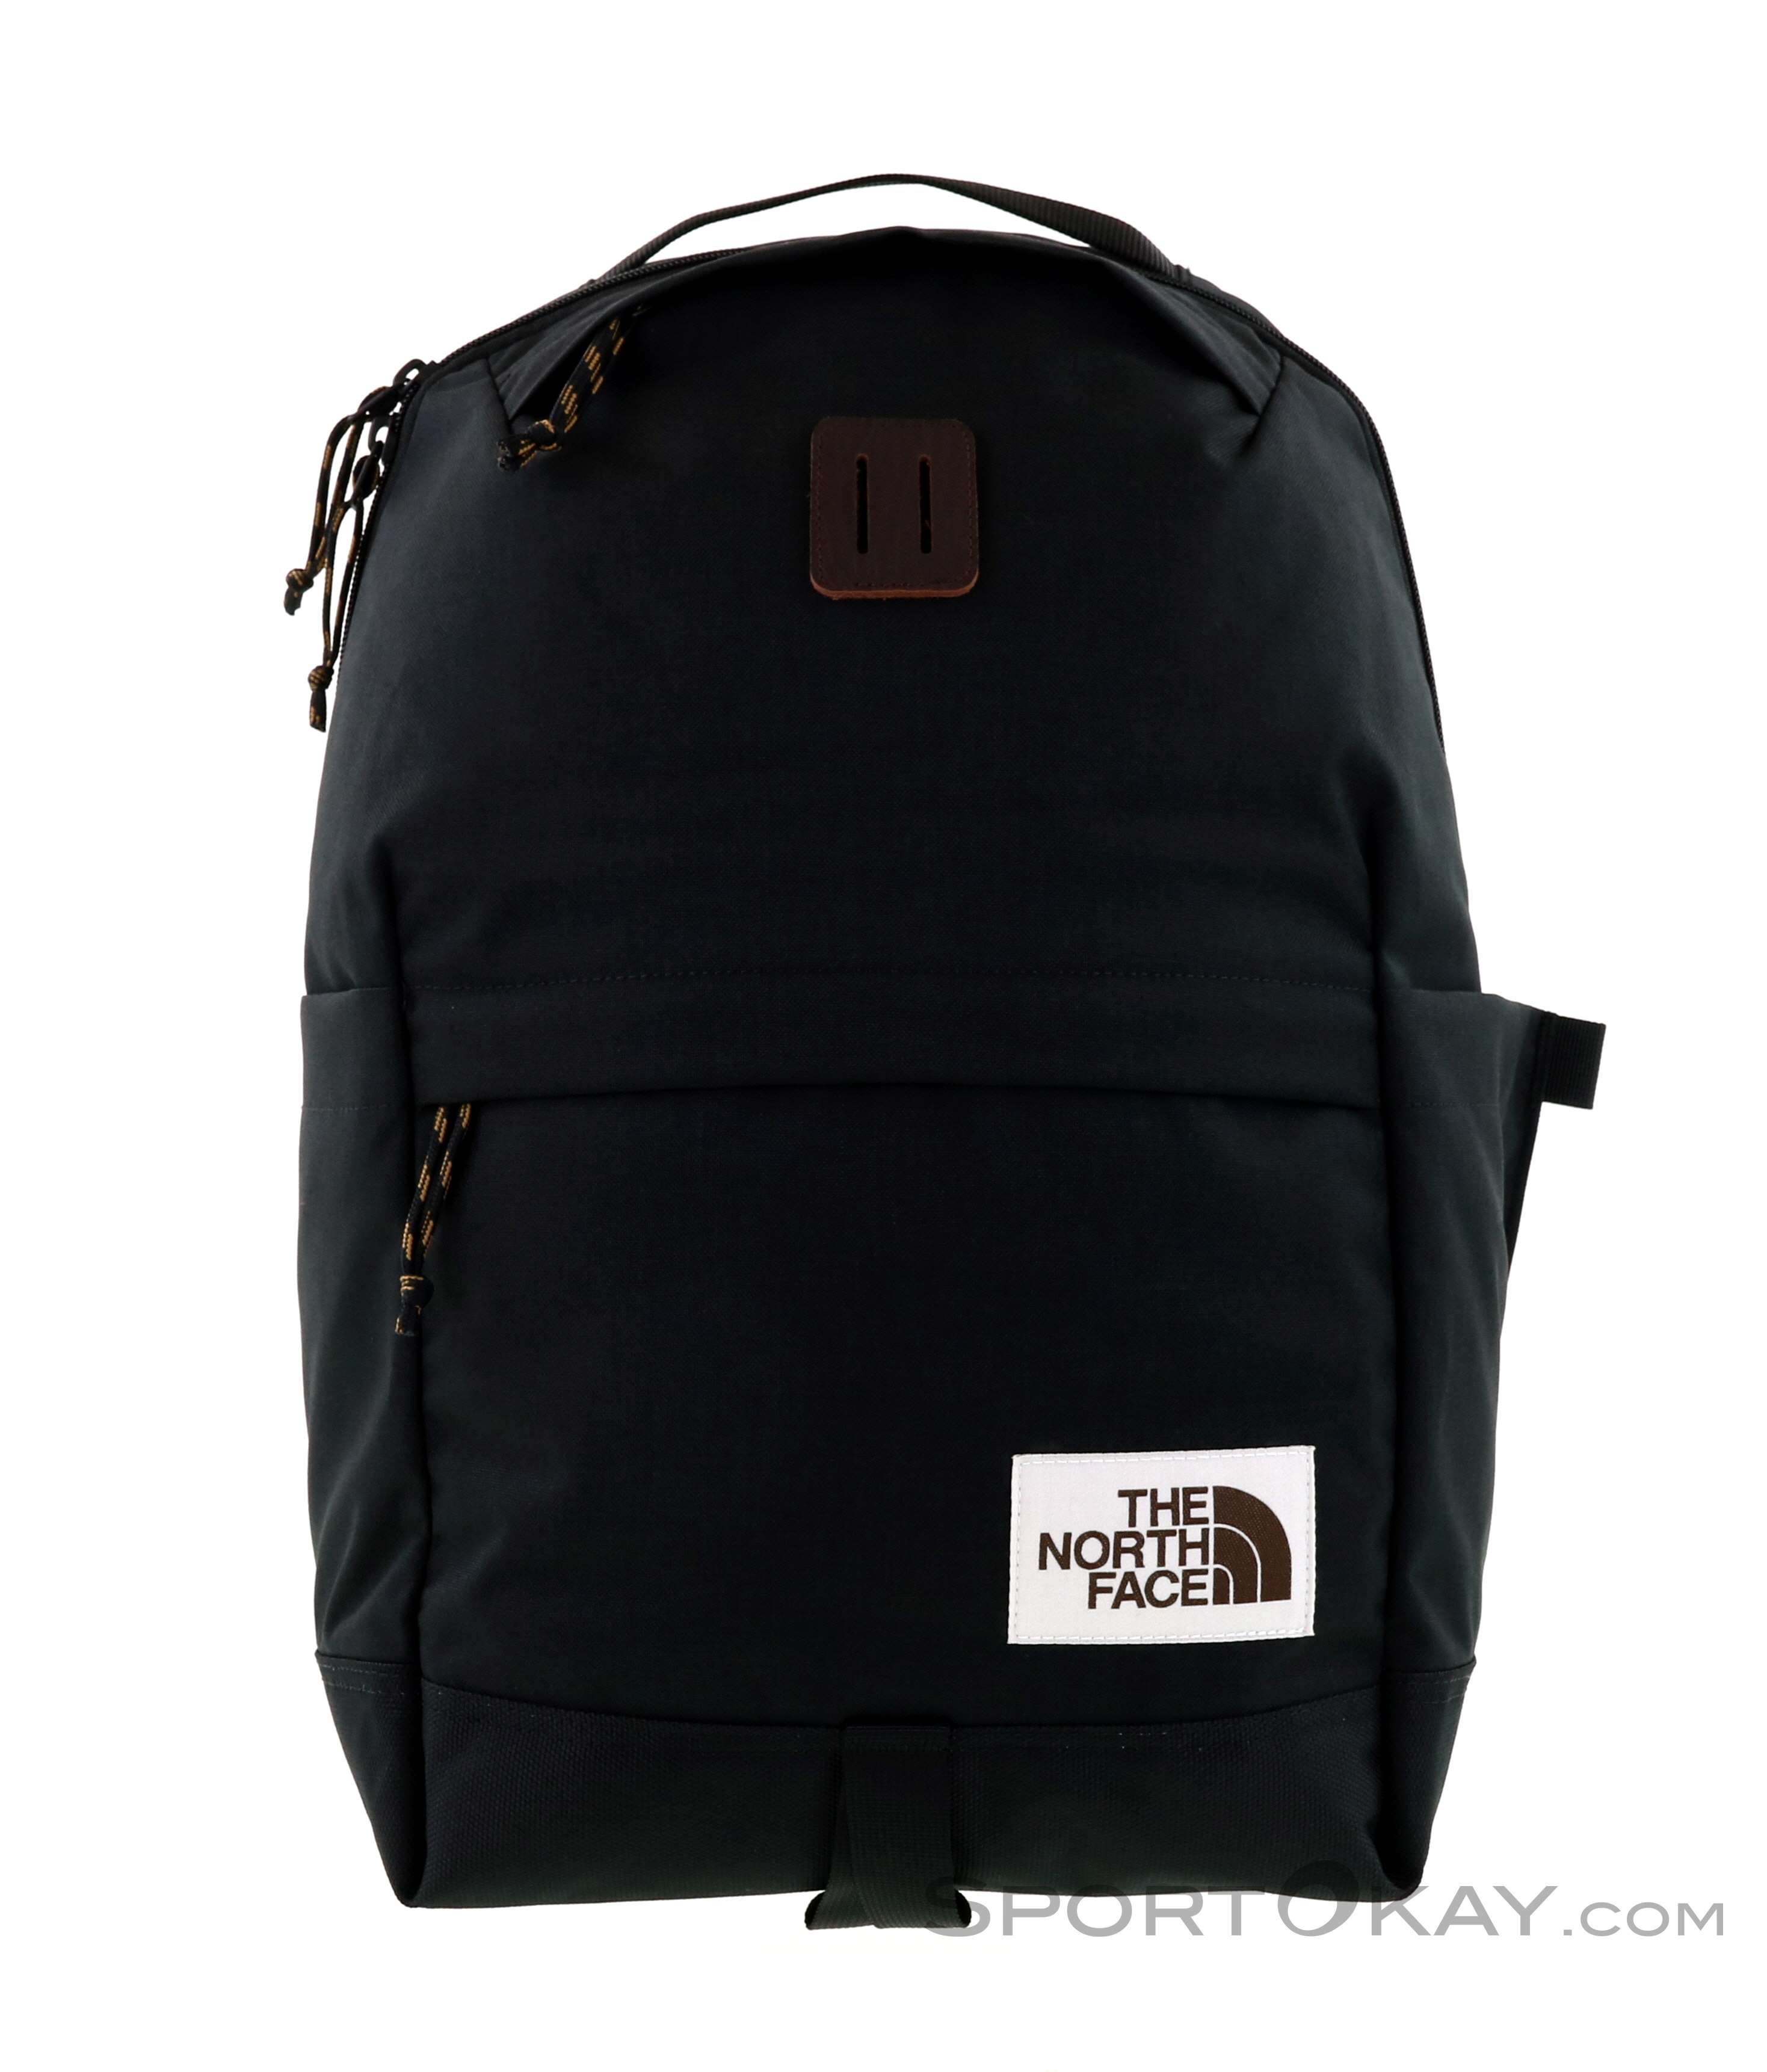 the north face day pack